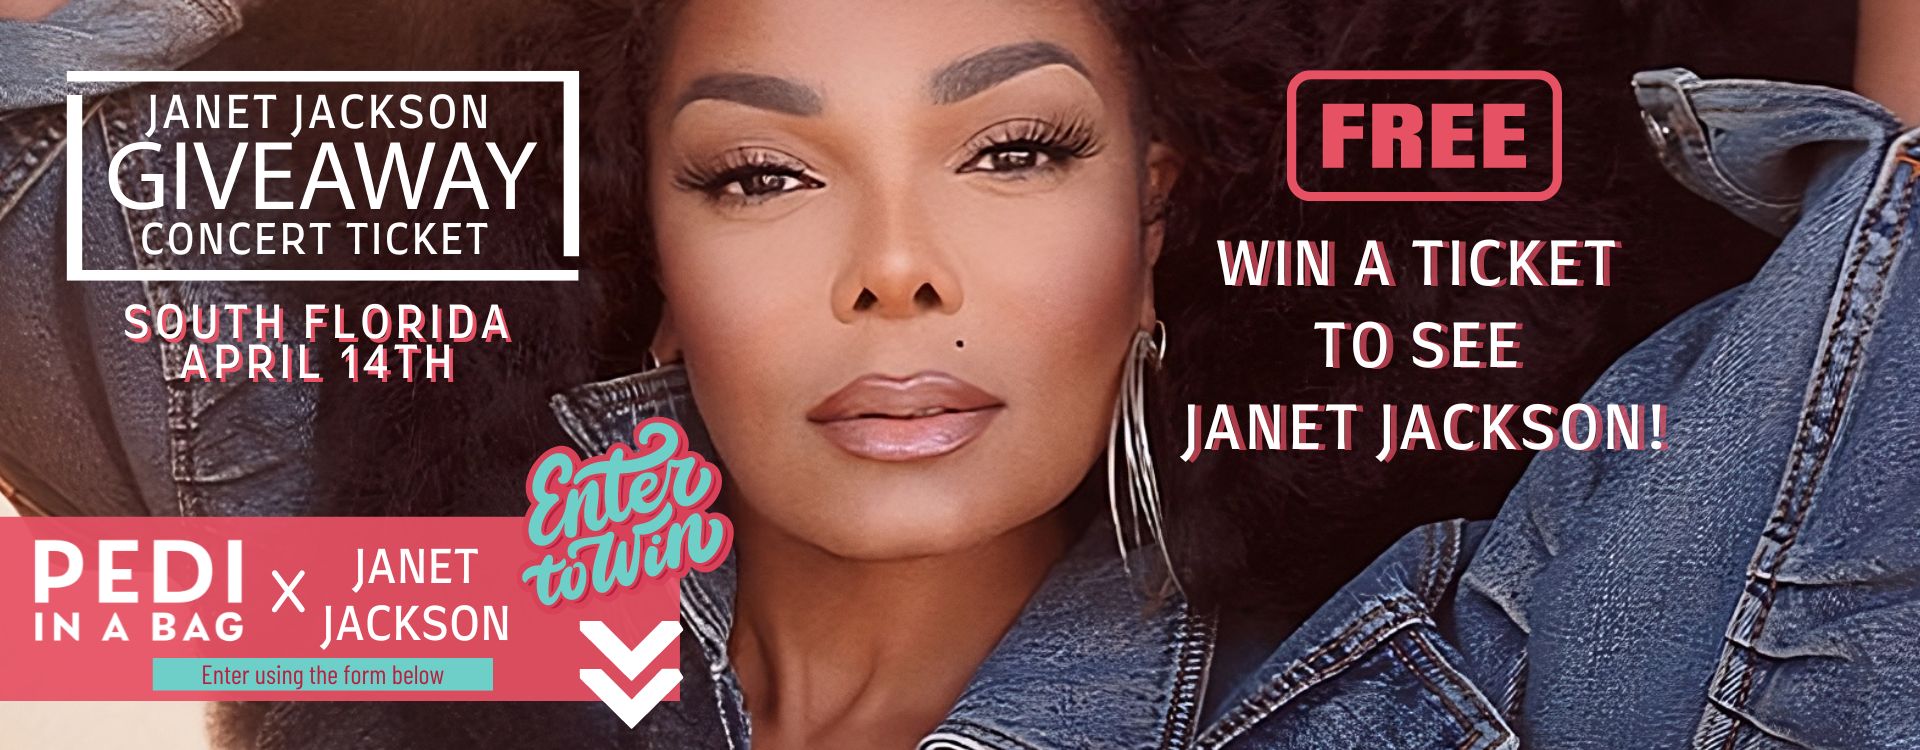 Win Free ticket to Janet Jackson Concert